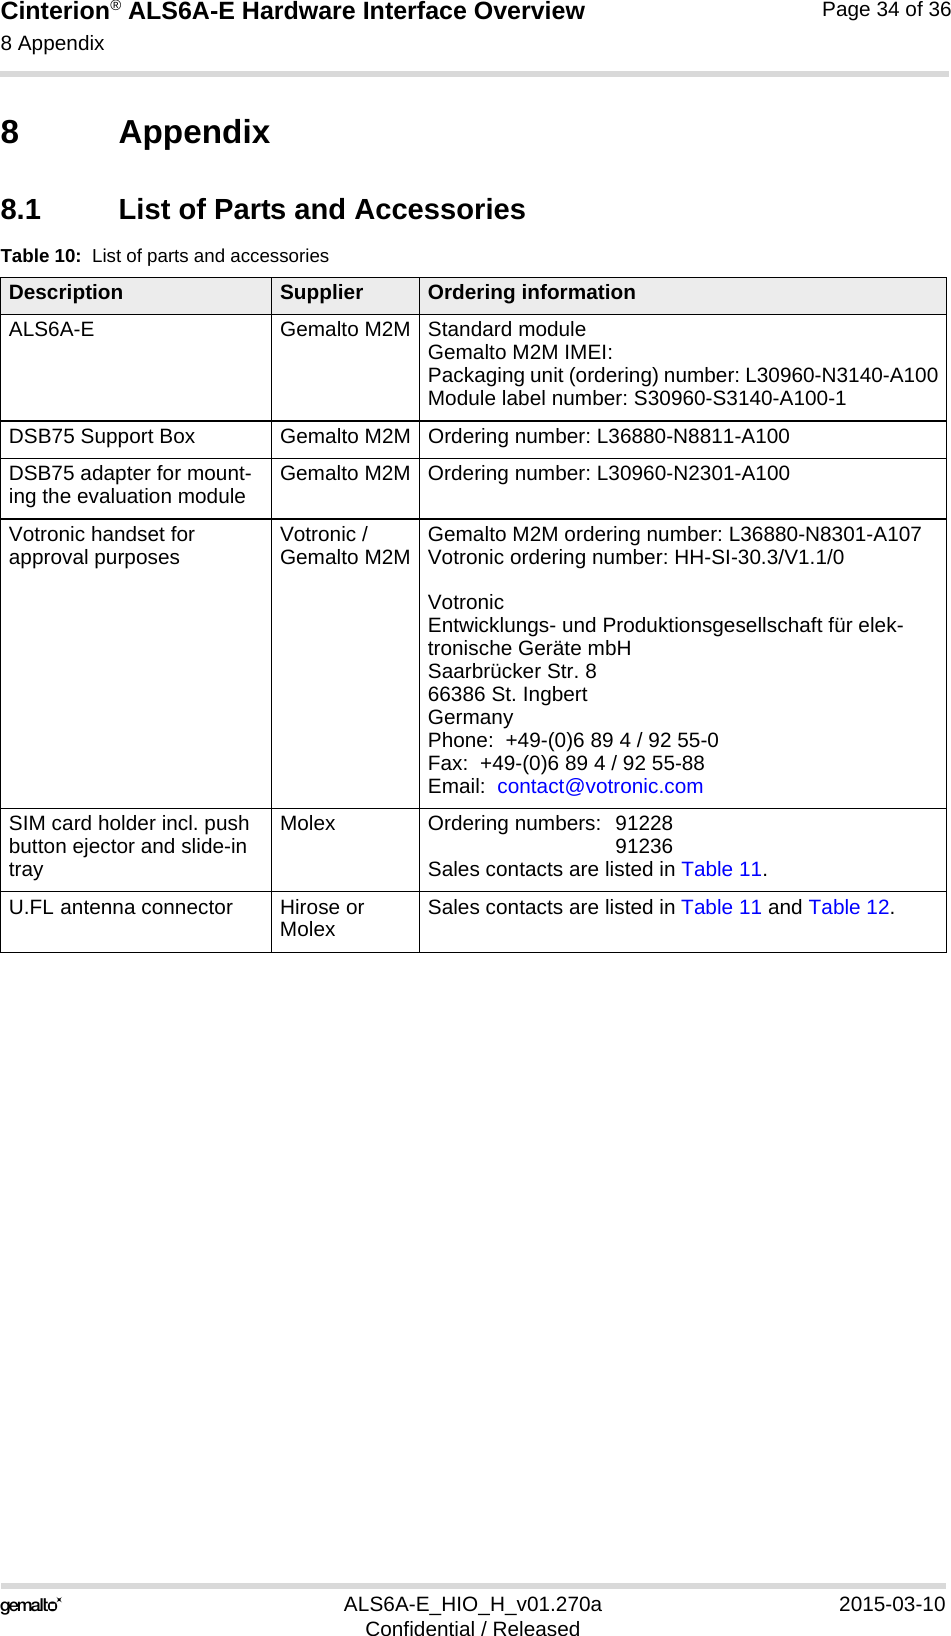 Cinterion® ALS6A-E Hardware Interface Overview8 Appendix35ALS6A-E_HIO_H_v01.270a 2015-03-10Confidential / ReleasedPage 34 of 368 Appendix8.1 List of Parts and AccessoriesTable 10:  List of parts and accessoriesDescription Supplier Ordering informationALS6A-E Gemalto M2M Standard module Gemalto M2M IMEI:Packaging unit (ordering) number: L30960-N3140-A100Module label number: S30960-S3140-A100-1DSB75 Support Box Gemalto M2M Ordering number: L36880-N8811-A100DSB75 adapter for mount-ing the evaluation module Gemalto M2M Ordering number: L30960-N2301-A100Votronic handset for approval purposes Votronic / Gemalto M2M Gemalto M2M ordering number: L36880-N8301-A107Votronic ordering number: HH-SI-30.3/V1.1/0Votronic Entwicklungs- und Produktionsgesellschaft für elek-tronische Geräte mbHSaarbrücker Str. 866386 St. IngbertGermanyPhone:  +49-(0)6 89 4 / 92 55-0Fax:  +49-(0)6 89 4 / 92 55-88Email:  contact@votronic.comSIM card holder incl. push button ejector and slide-in trayMolex Ordering numbers:  91228 91236Sales contacts are listed in Table 11.U.FL antenna connector Hirose or Molex Sales contacts are listed in Table 11 and Table 12.